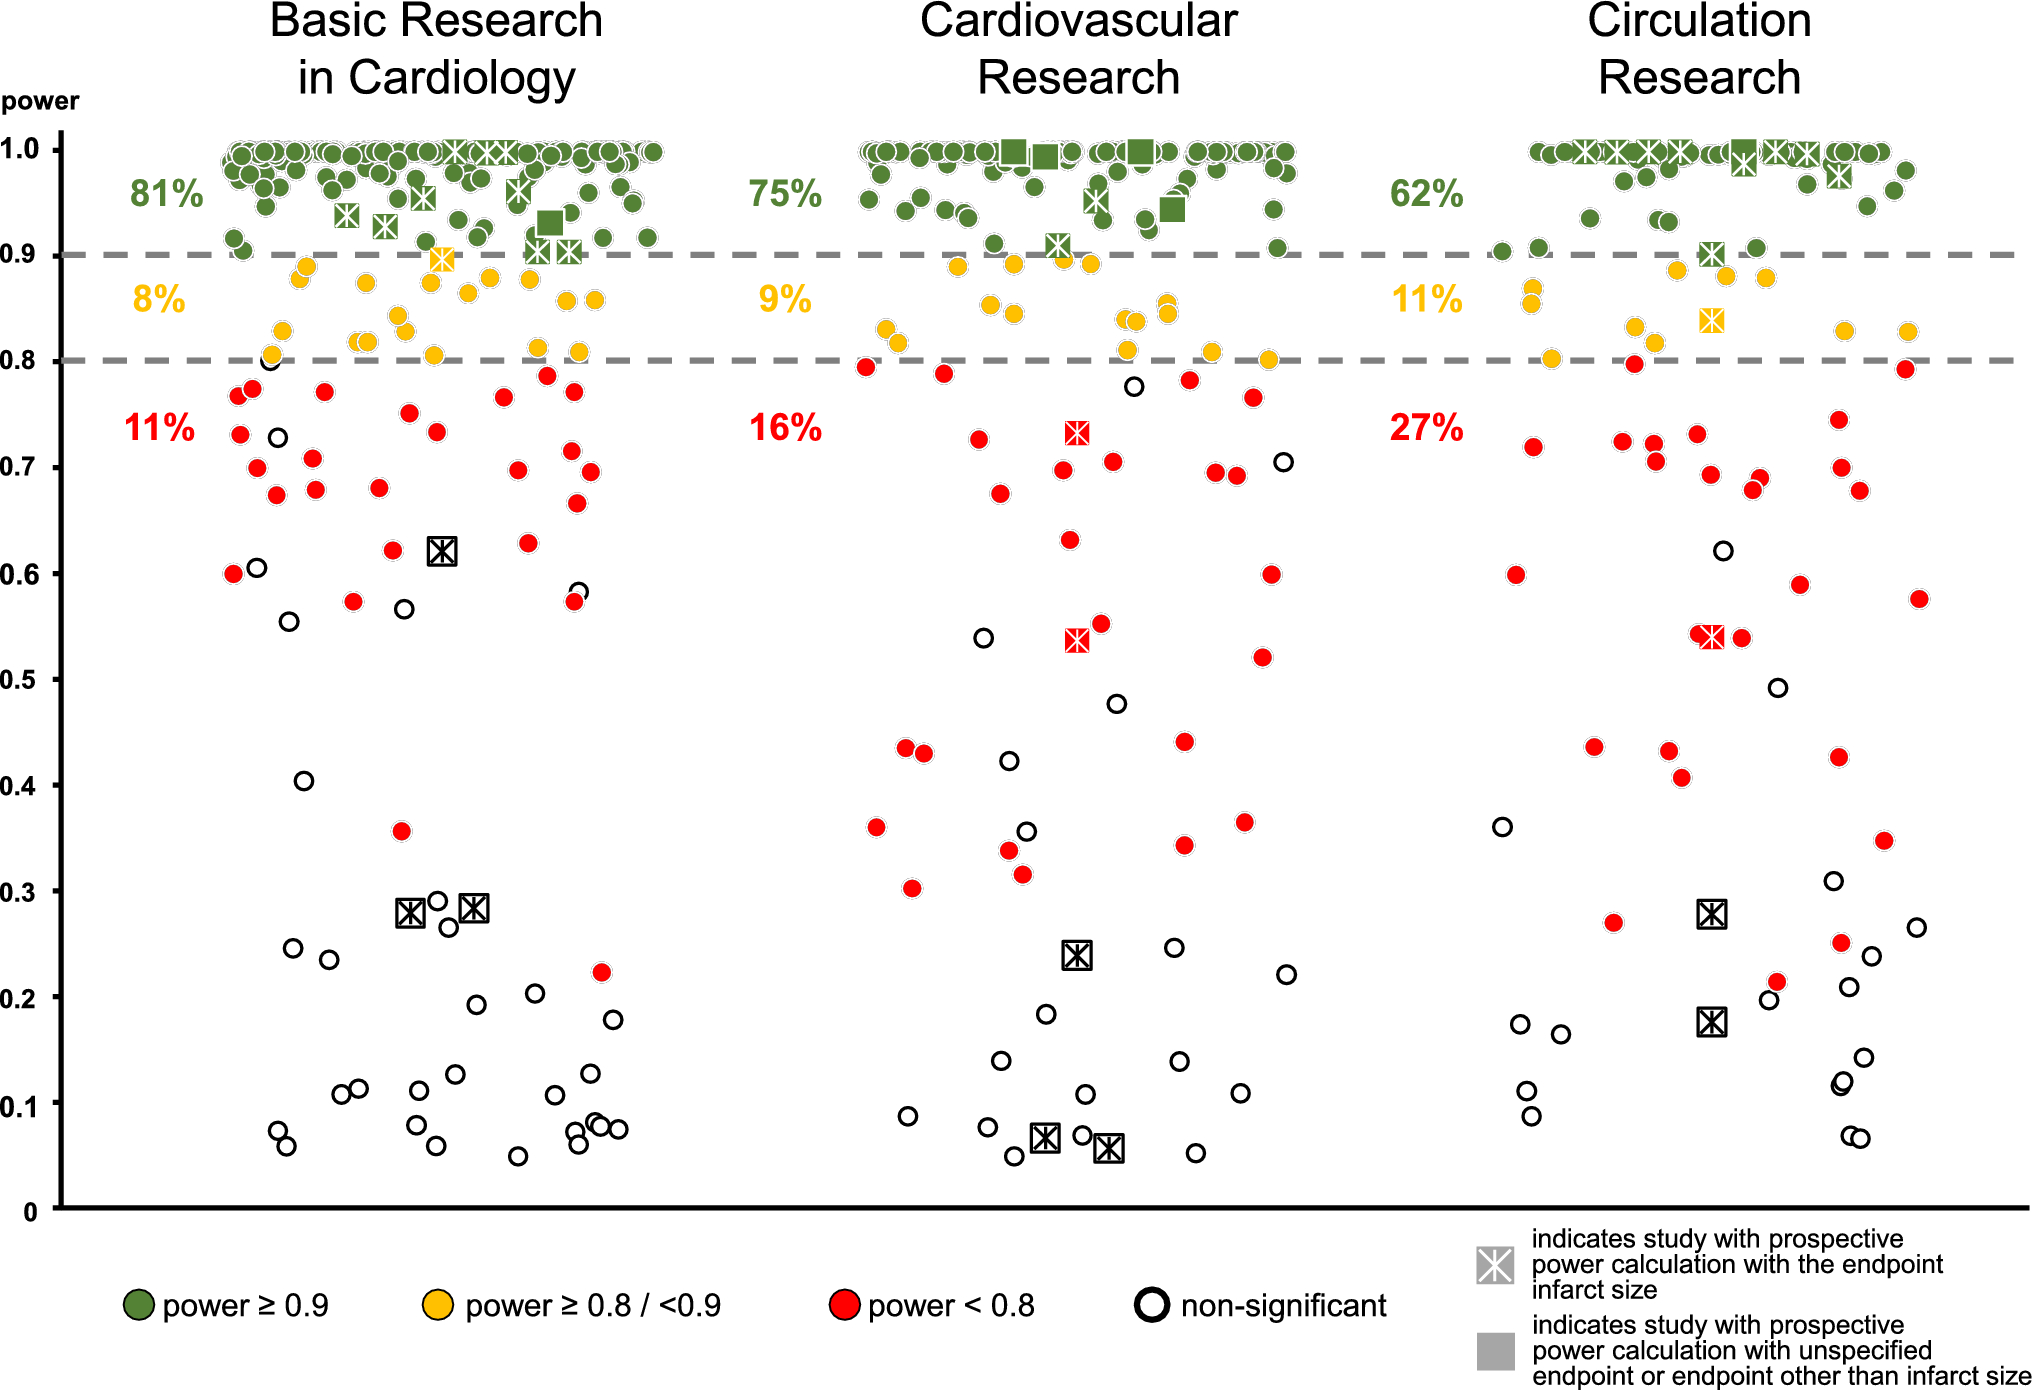 “Expression of concern”: publication bias for positive preclinical cardioprotection studies